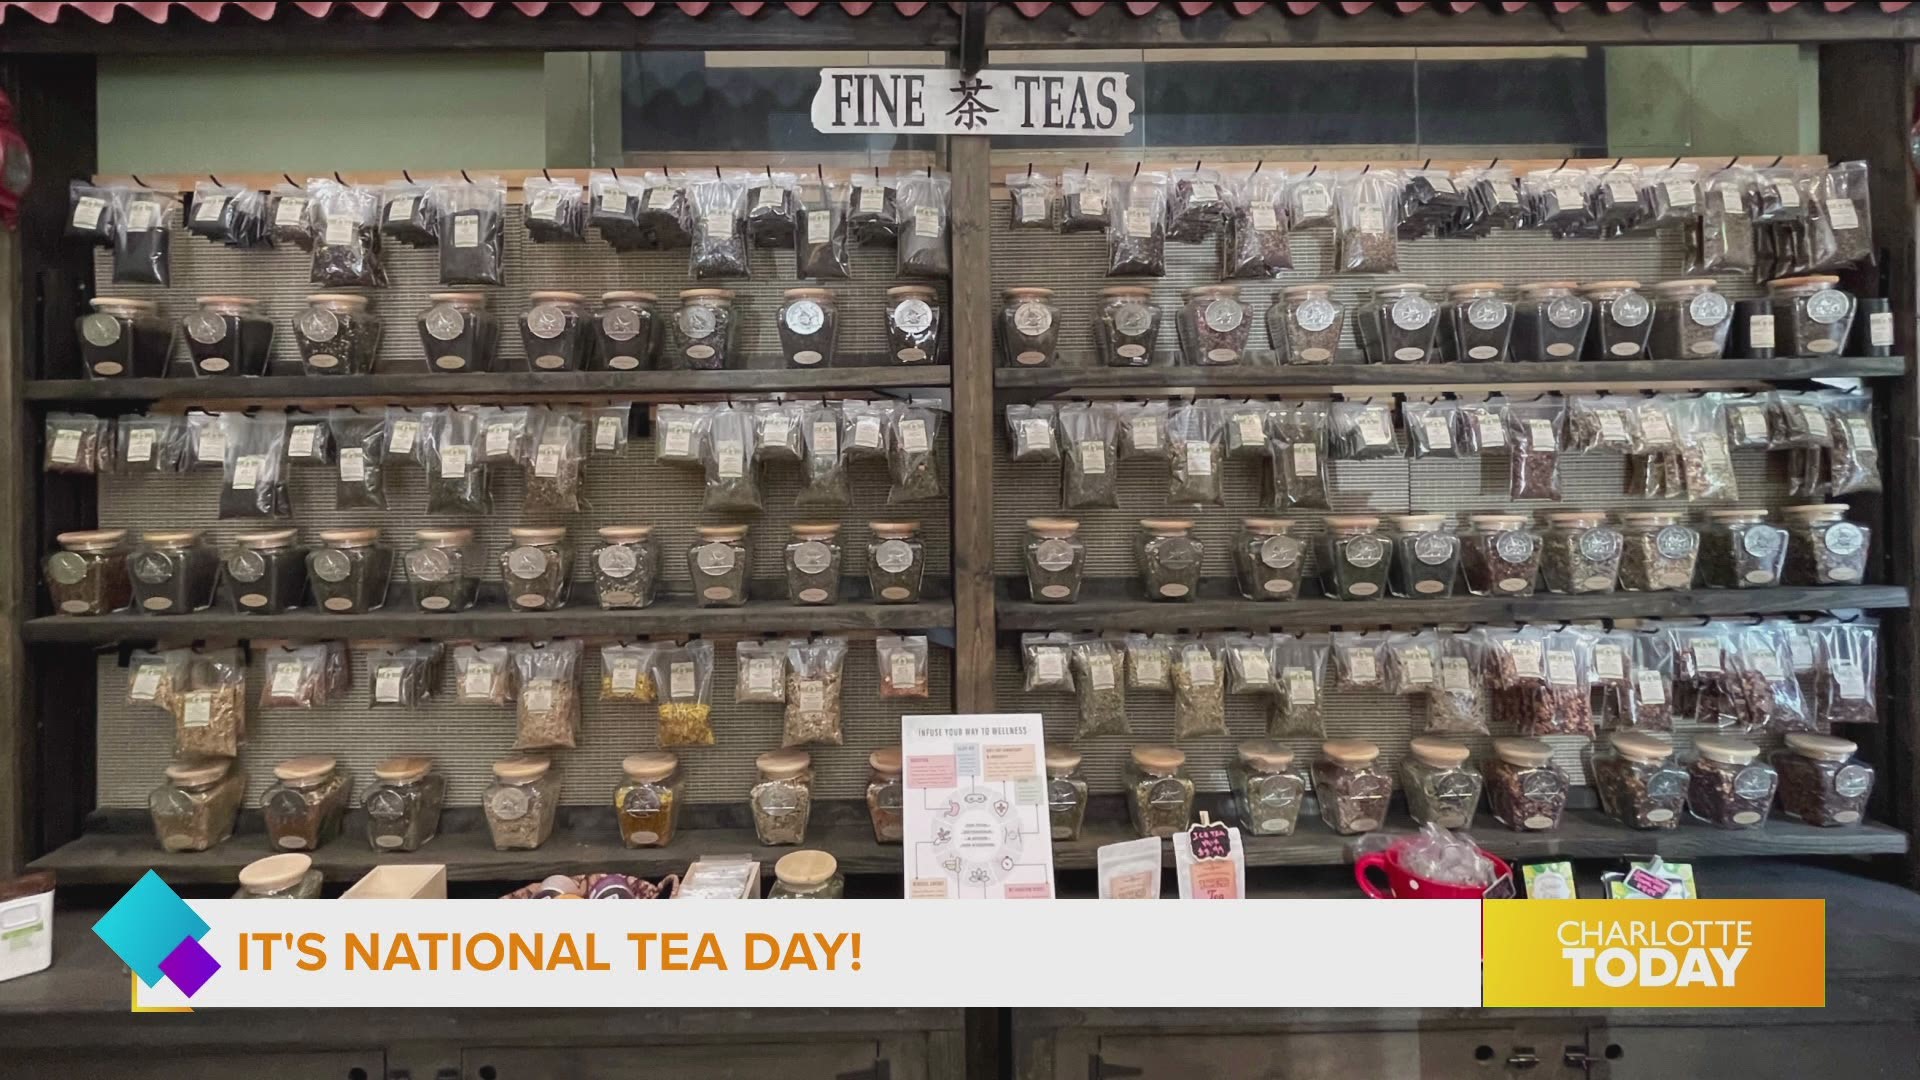 Everything you want to know about tea!